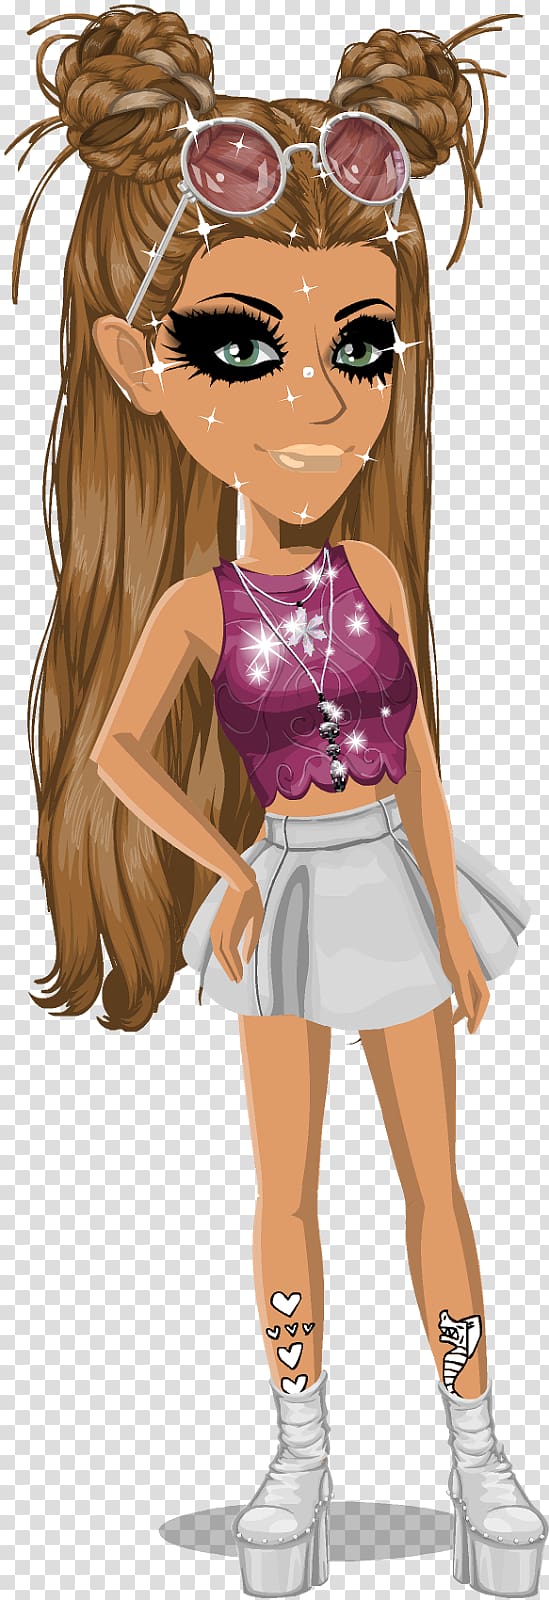 MovieStarPlanet Animation Hair Female, Vip Party transparent background PNG clipart